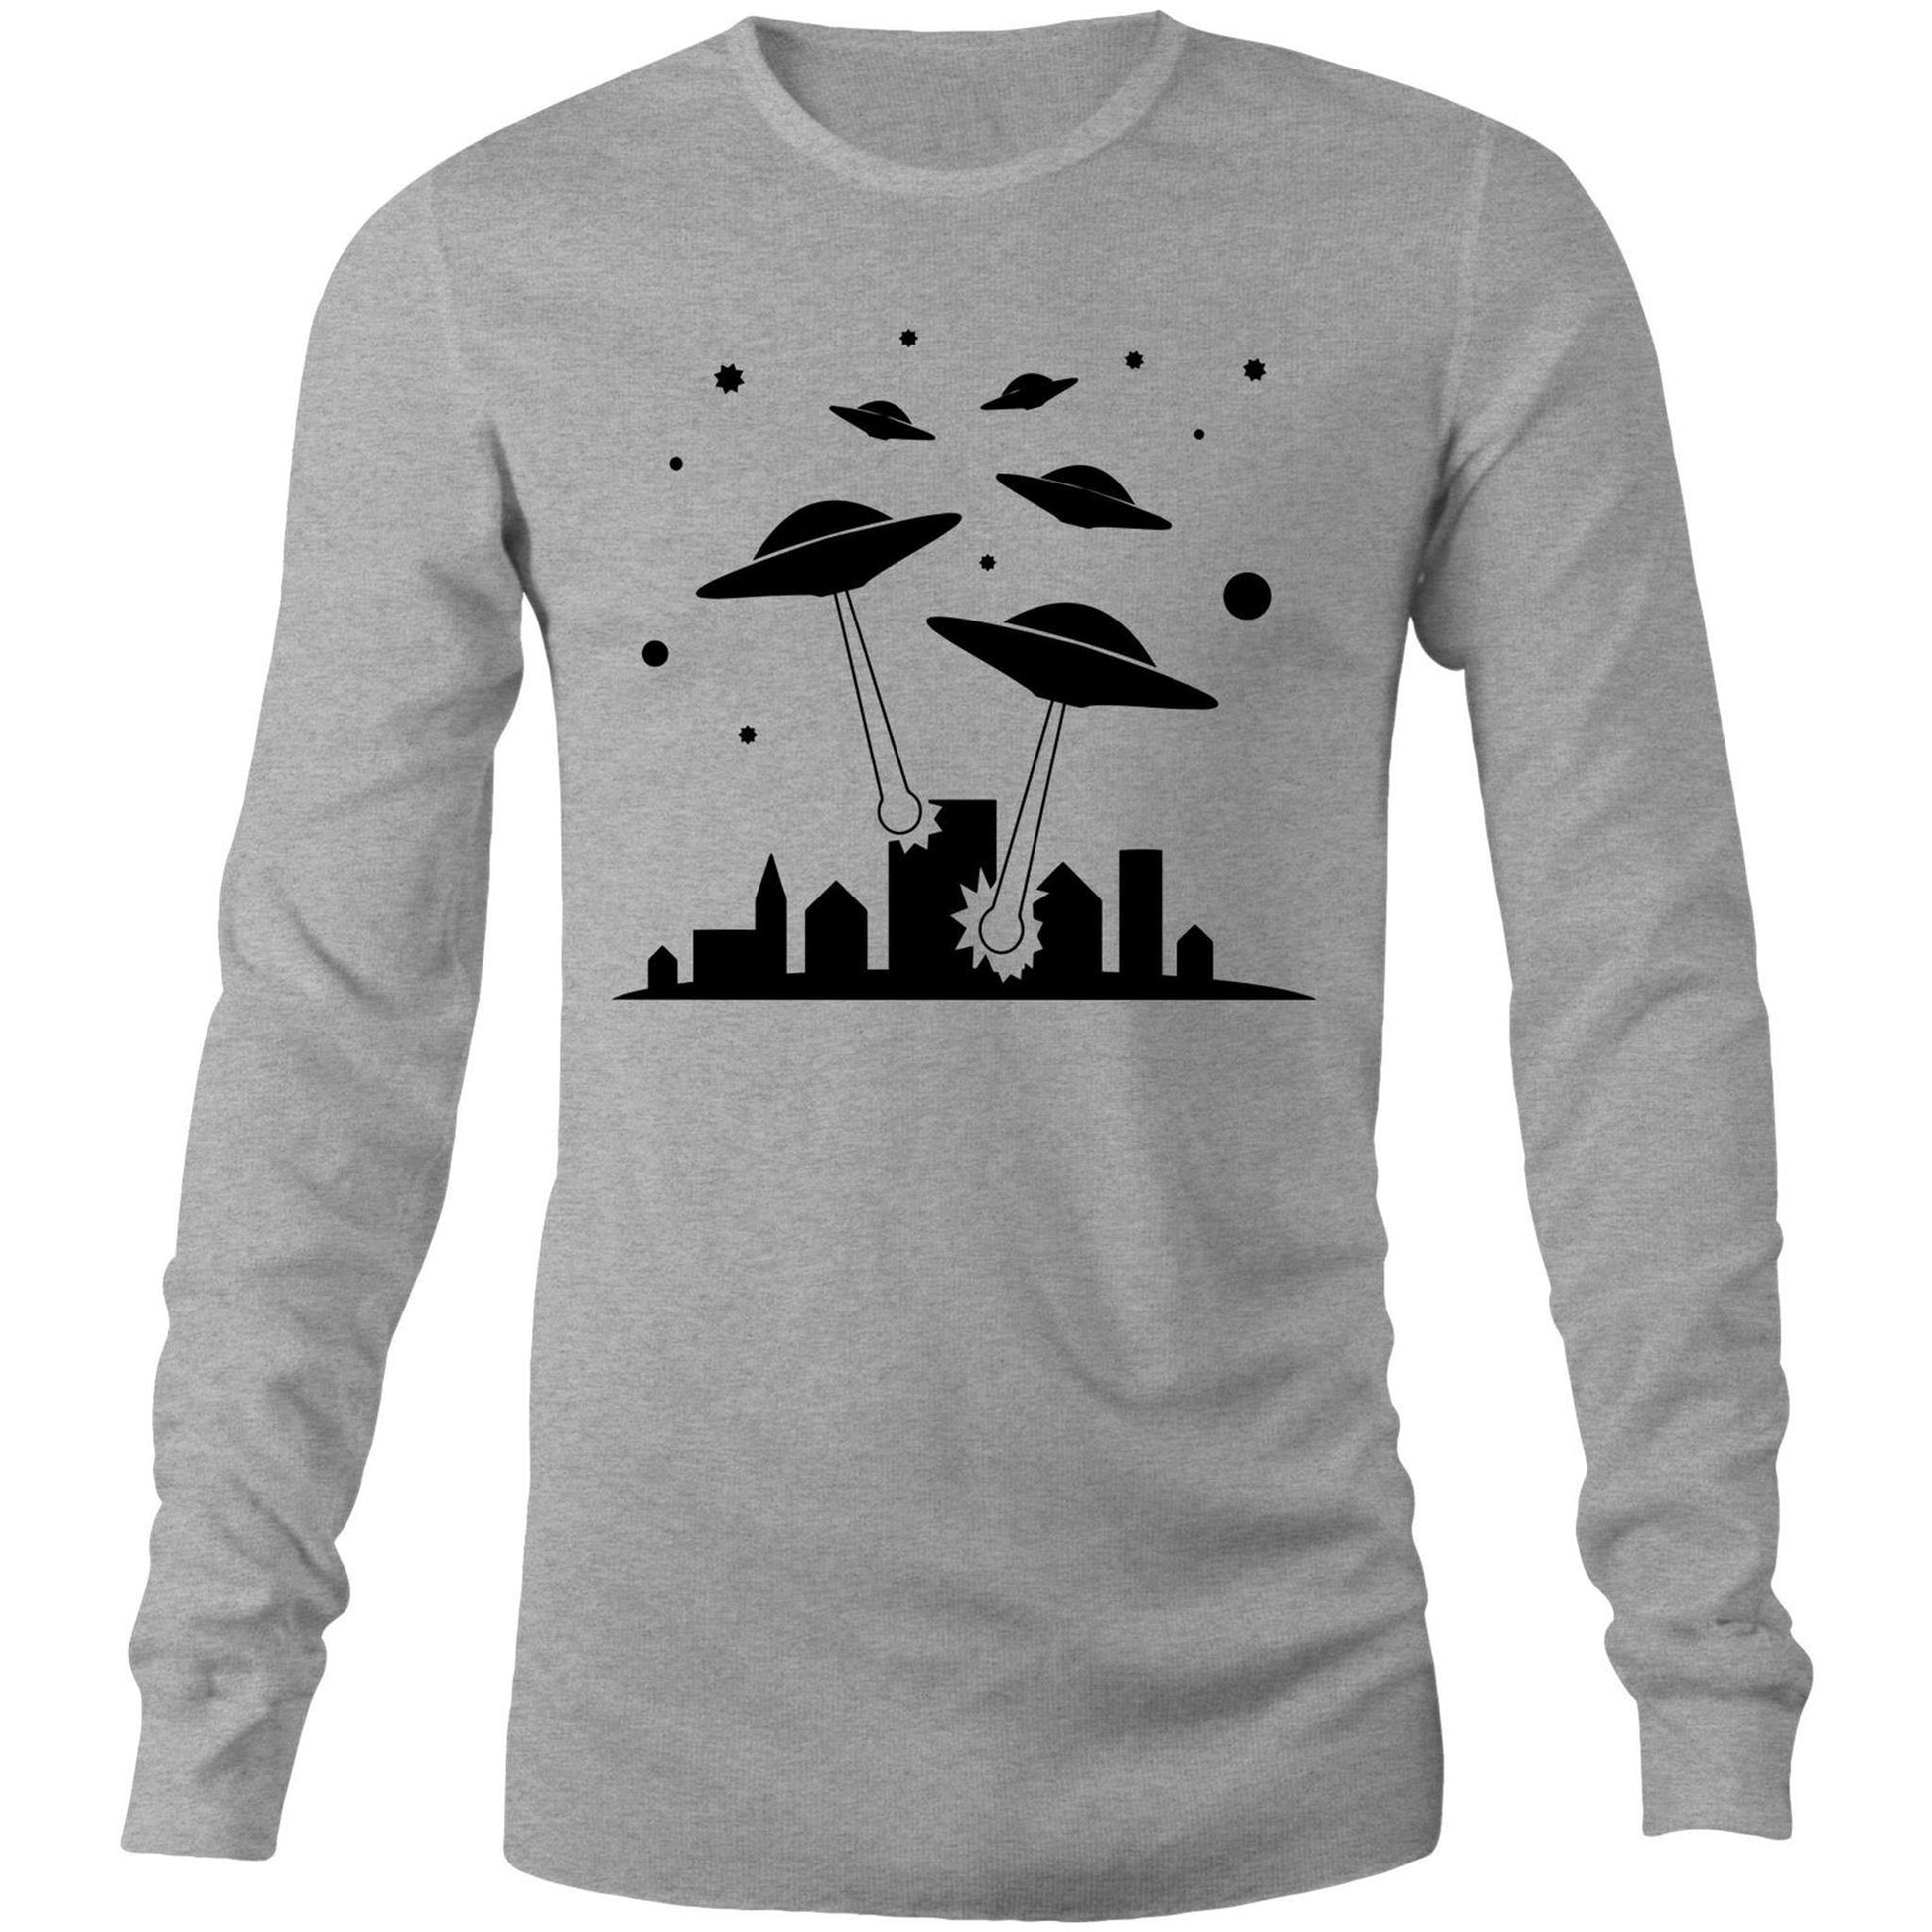 Space Invasion - Long Sleeve T-Shirt Grey Marle Unisex Long Sleeve T-shirt Mens Retro Sci Fi Space Womens